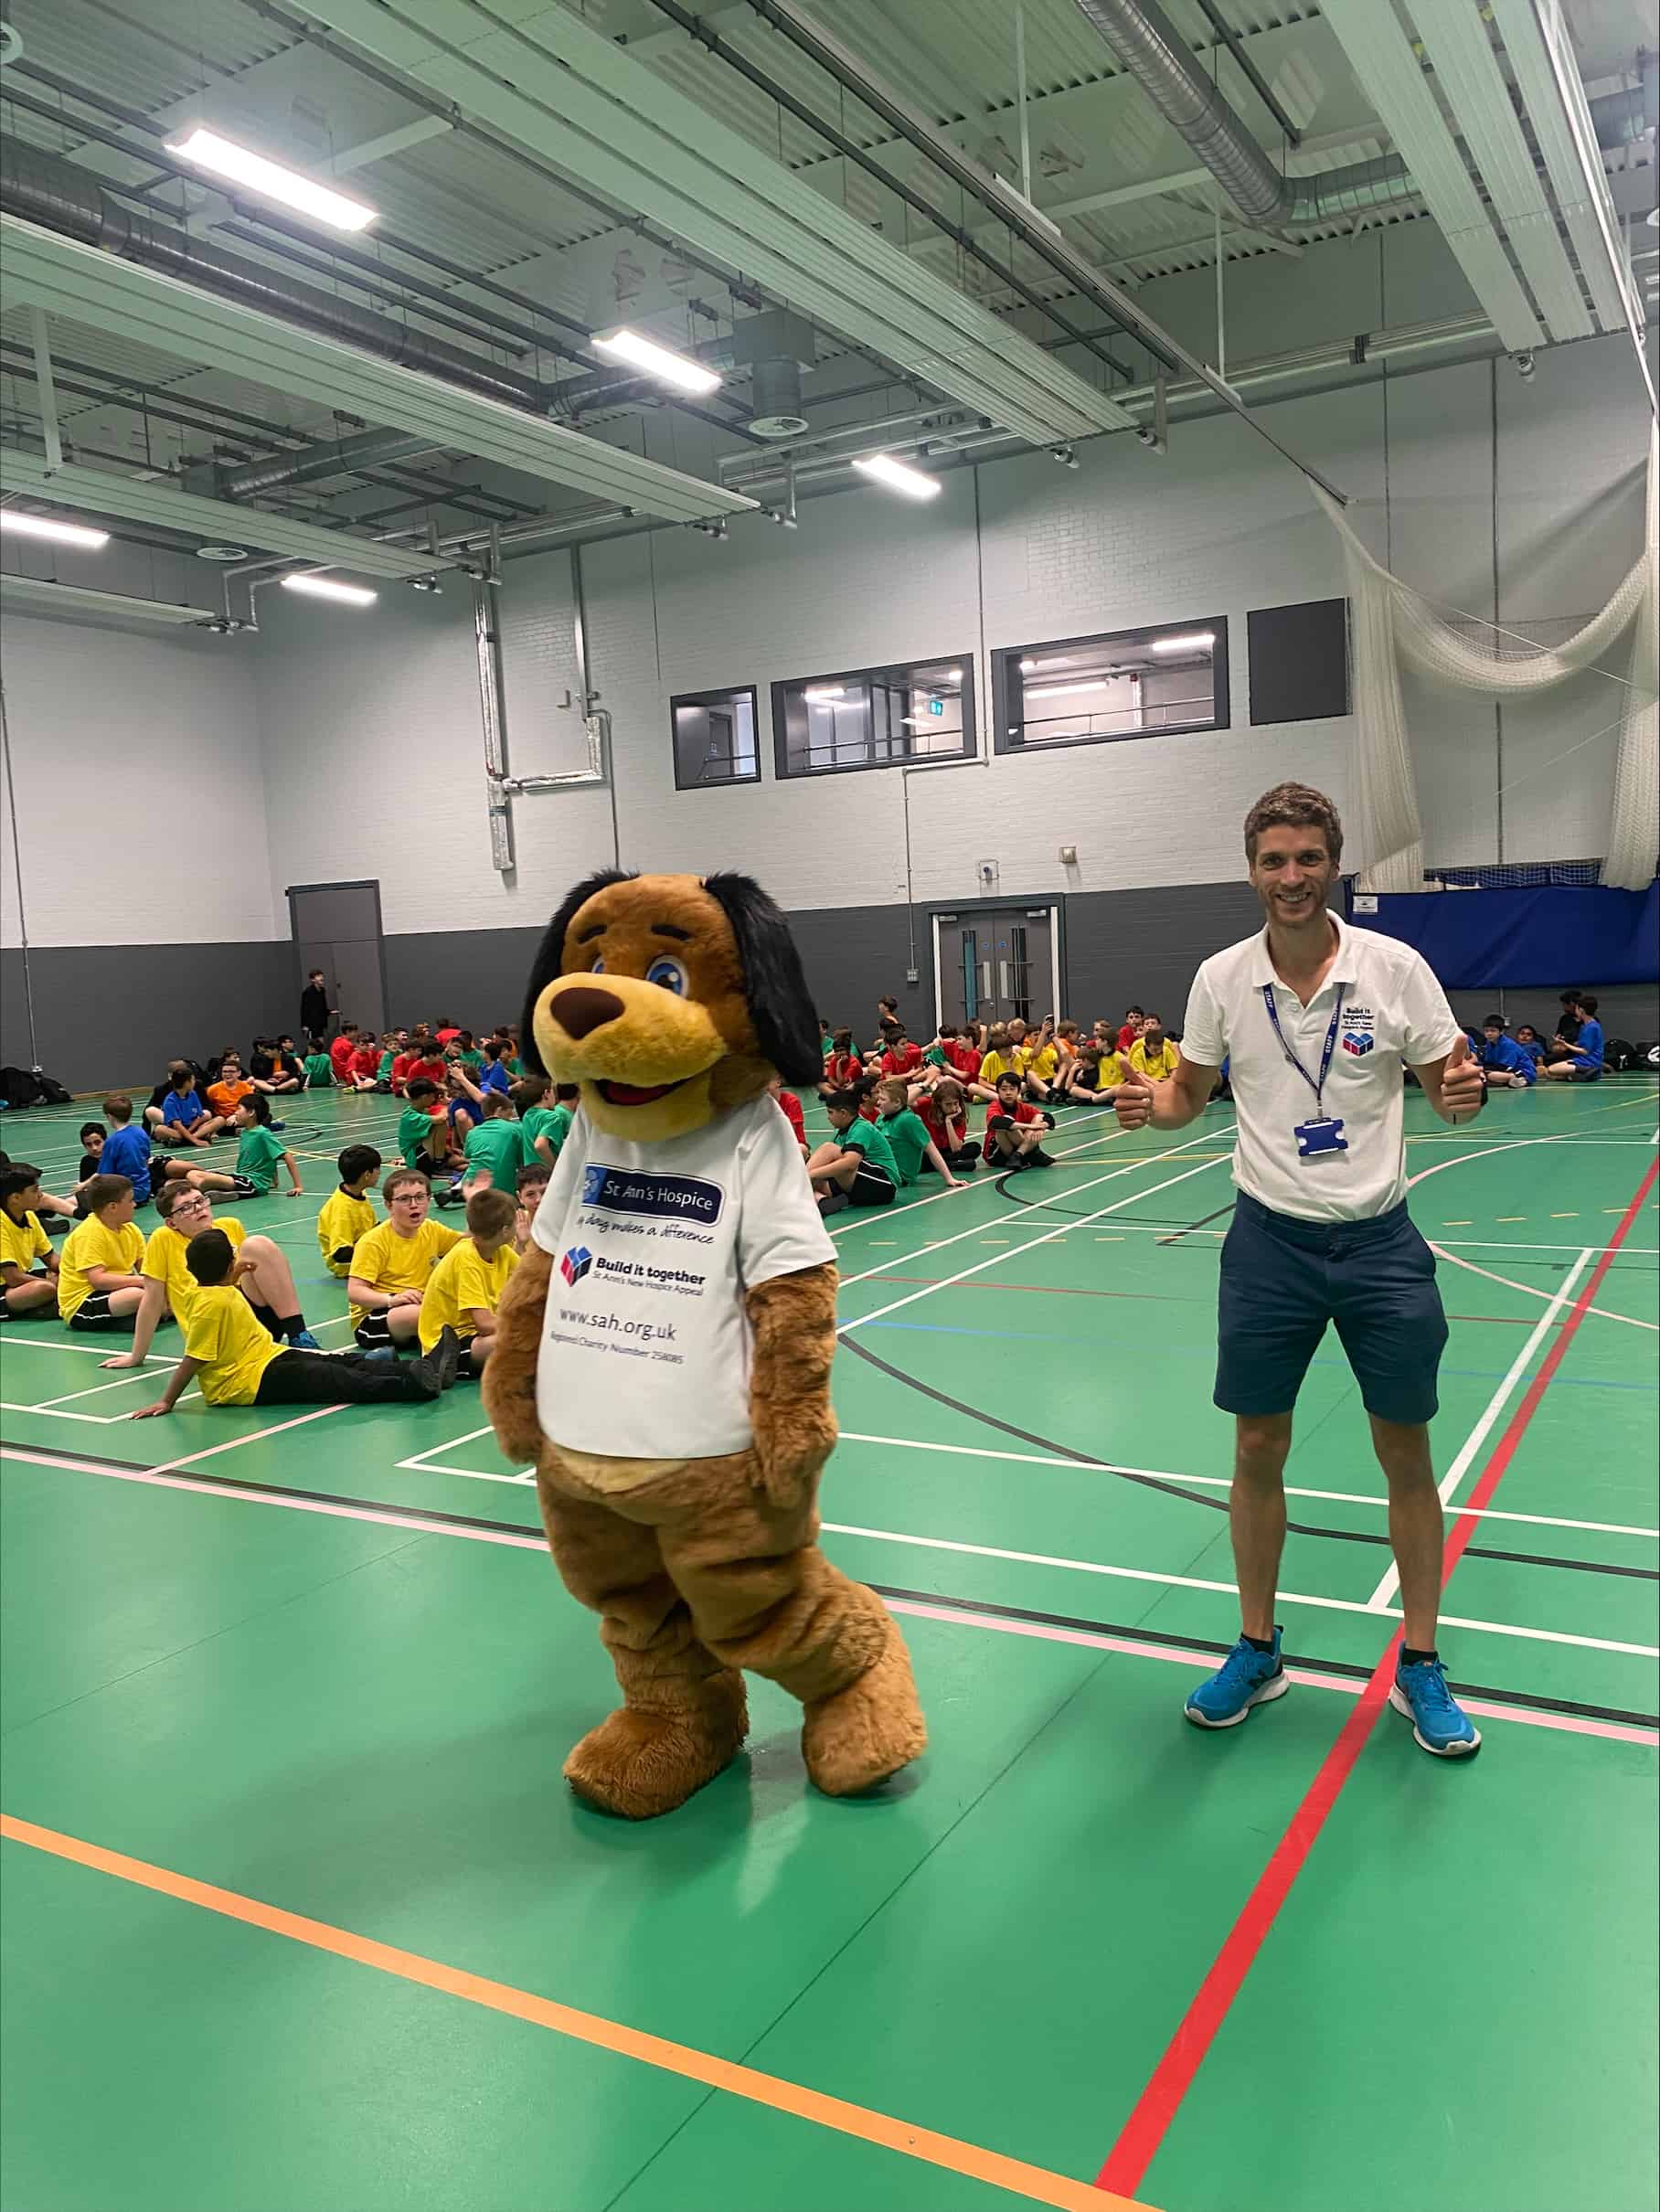 Year 7 students from Cheadle Hulme High School sit in the sports hall wearing their House team shirts, Stan the St Ann's Hospice mascot dog stands next to a teacher in front of the crowd of students.